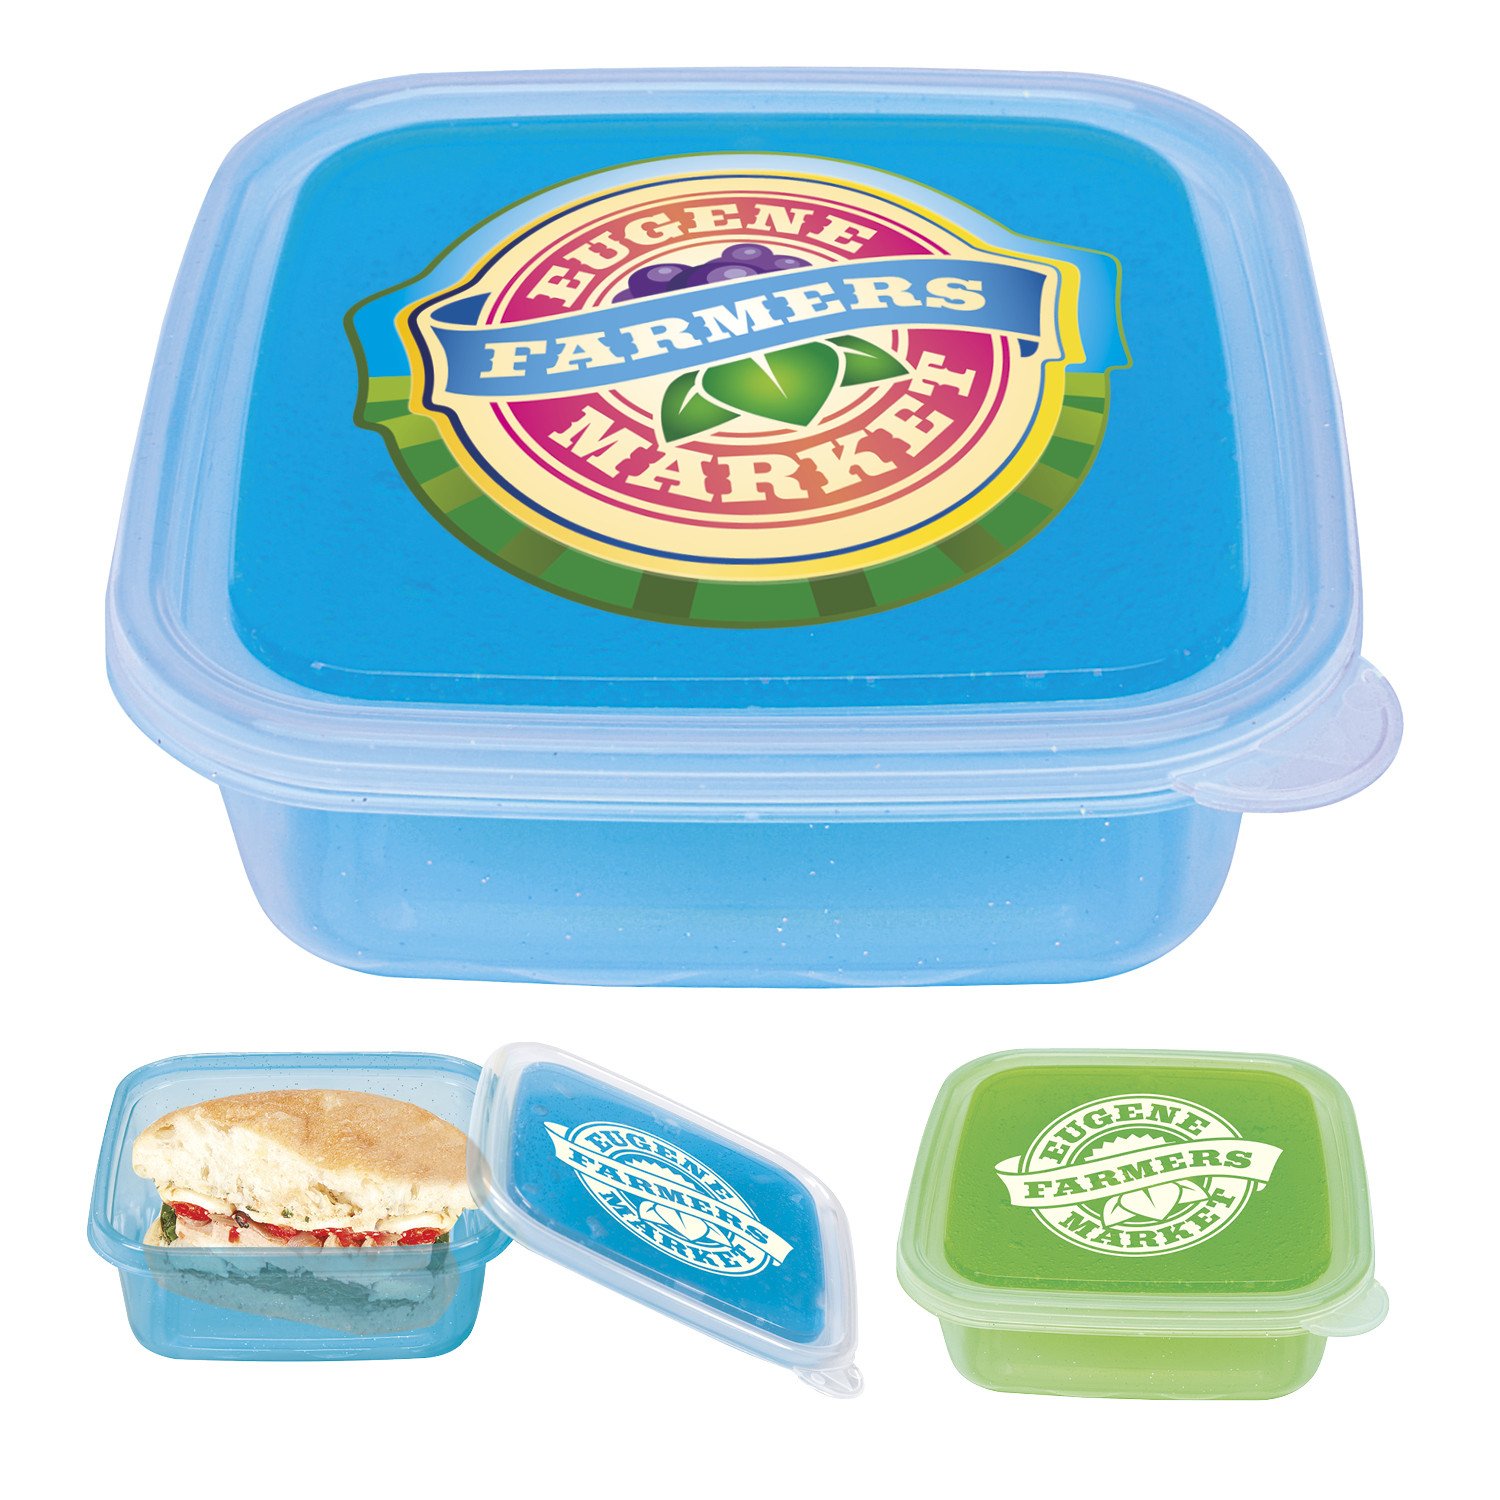 FREEZABLE GEL LID STORAGE CONTAINER, 45641